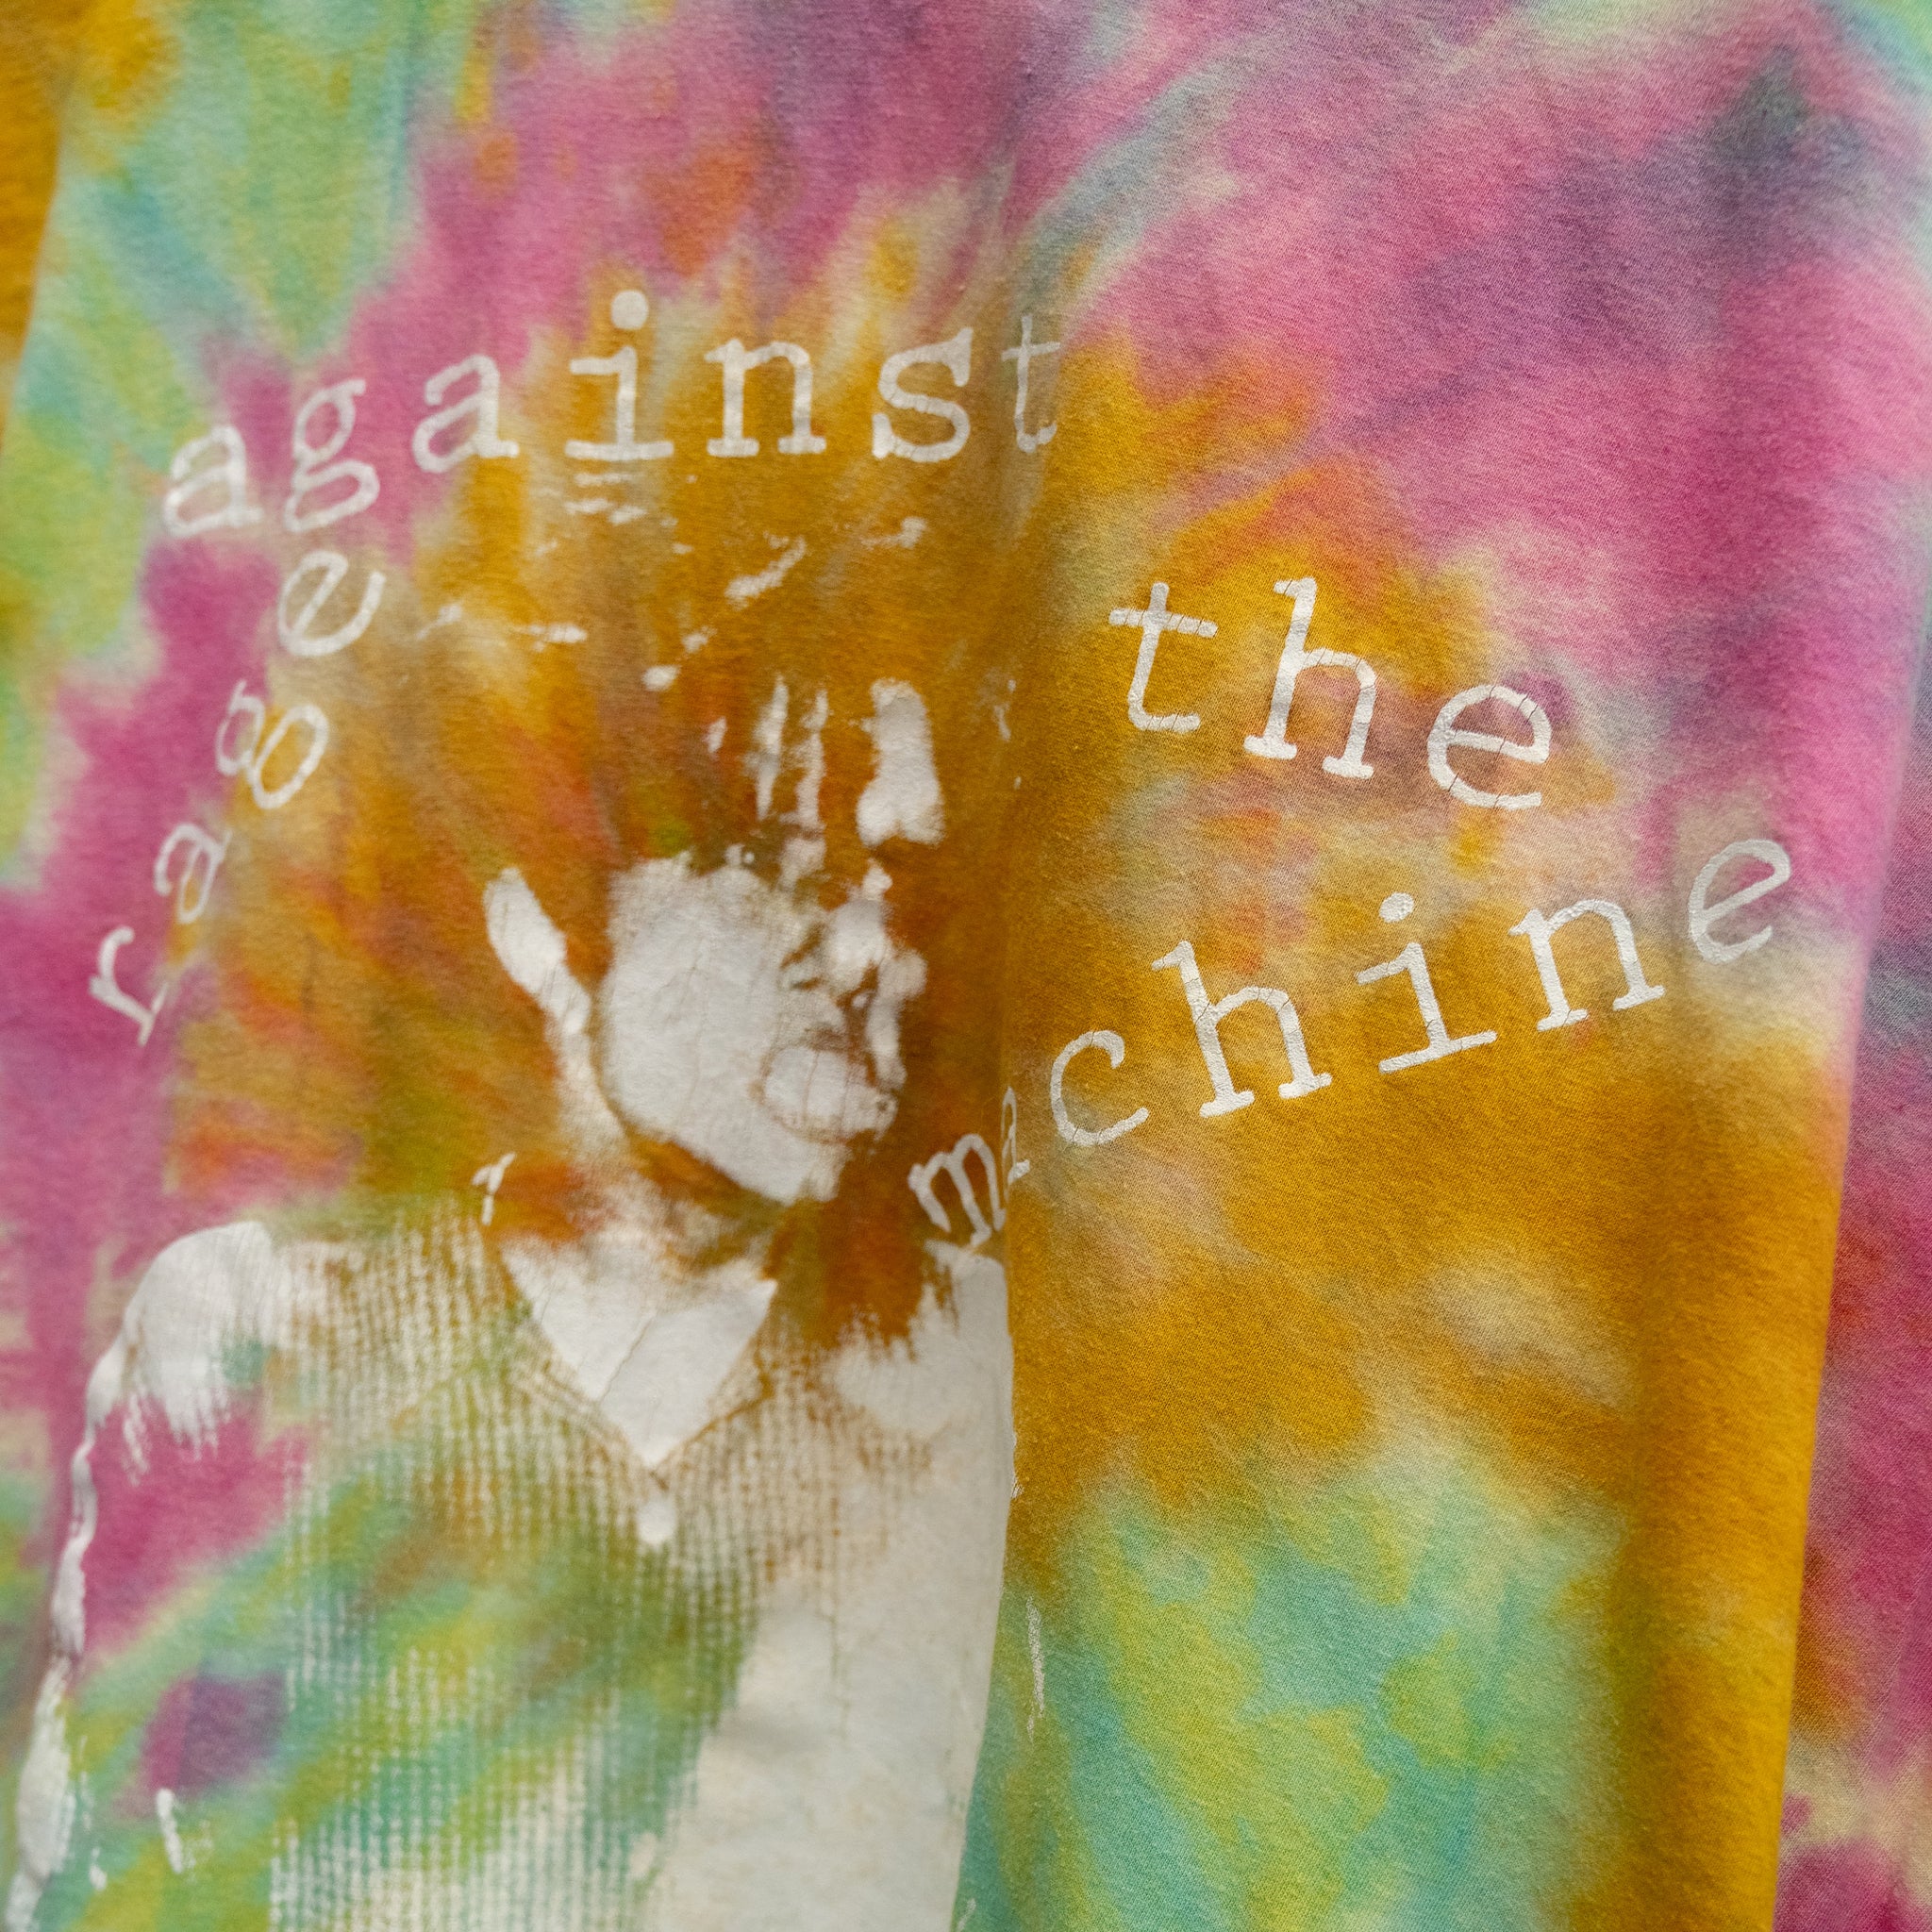 RAGE AGAINST THE MACHINE 'KILLING THE NAME' LONG-SLEEVE TEE - 1990'S